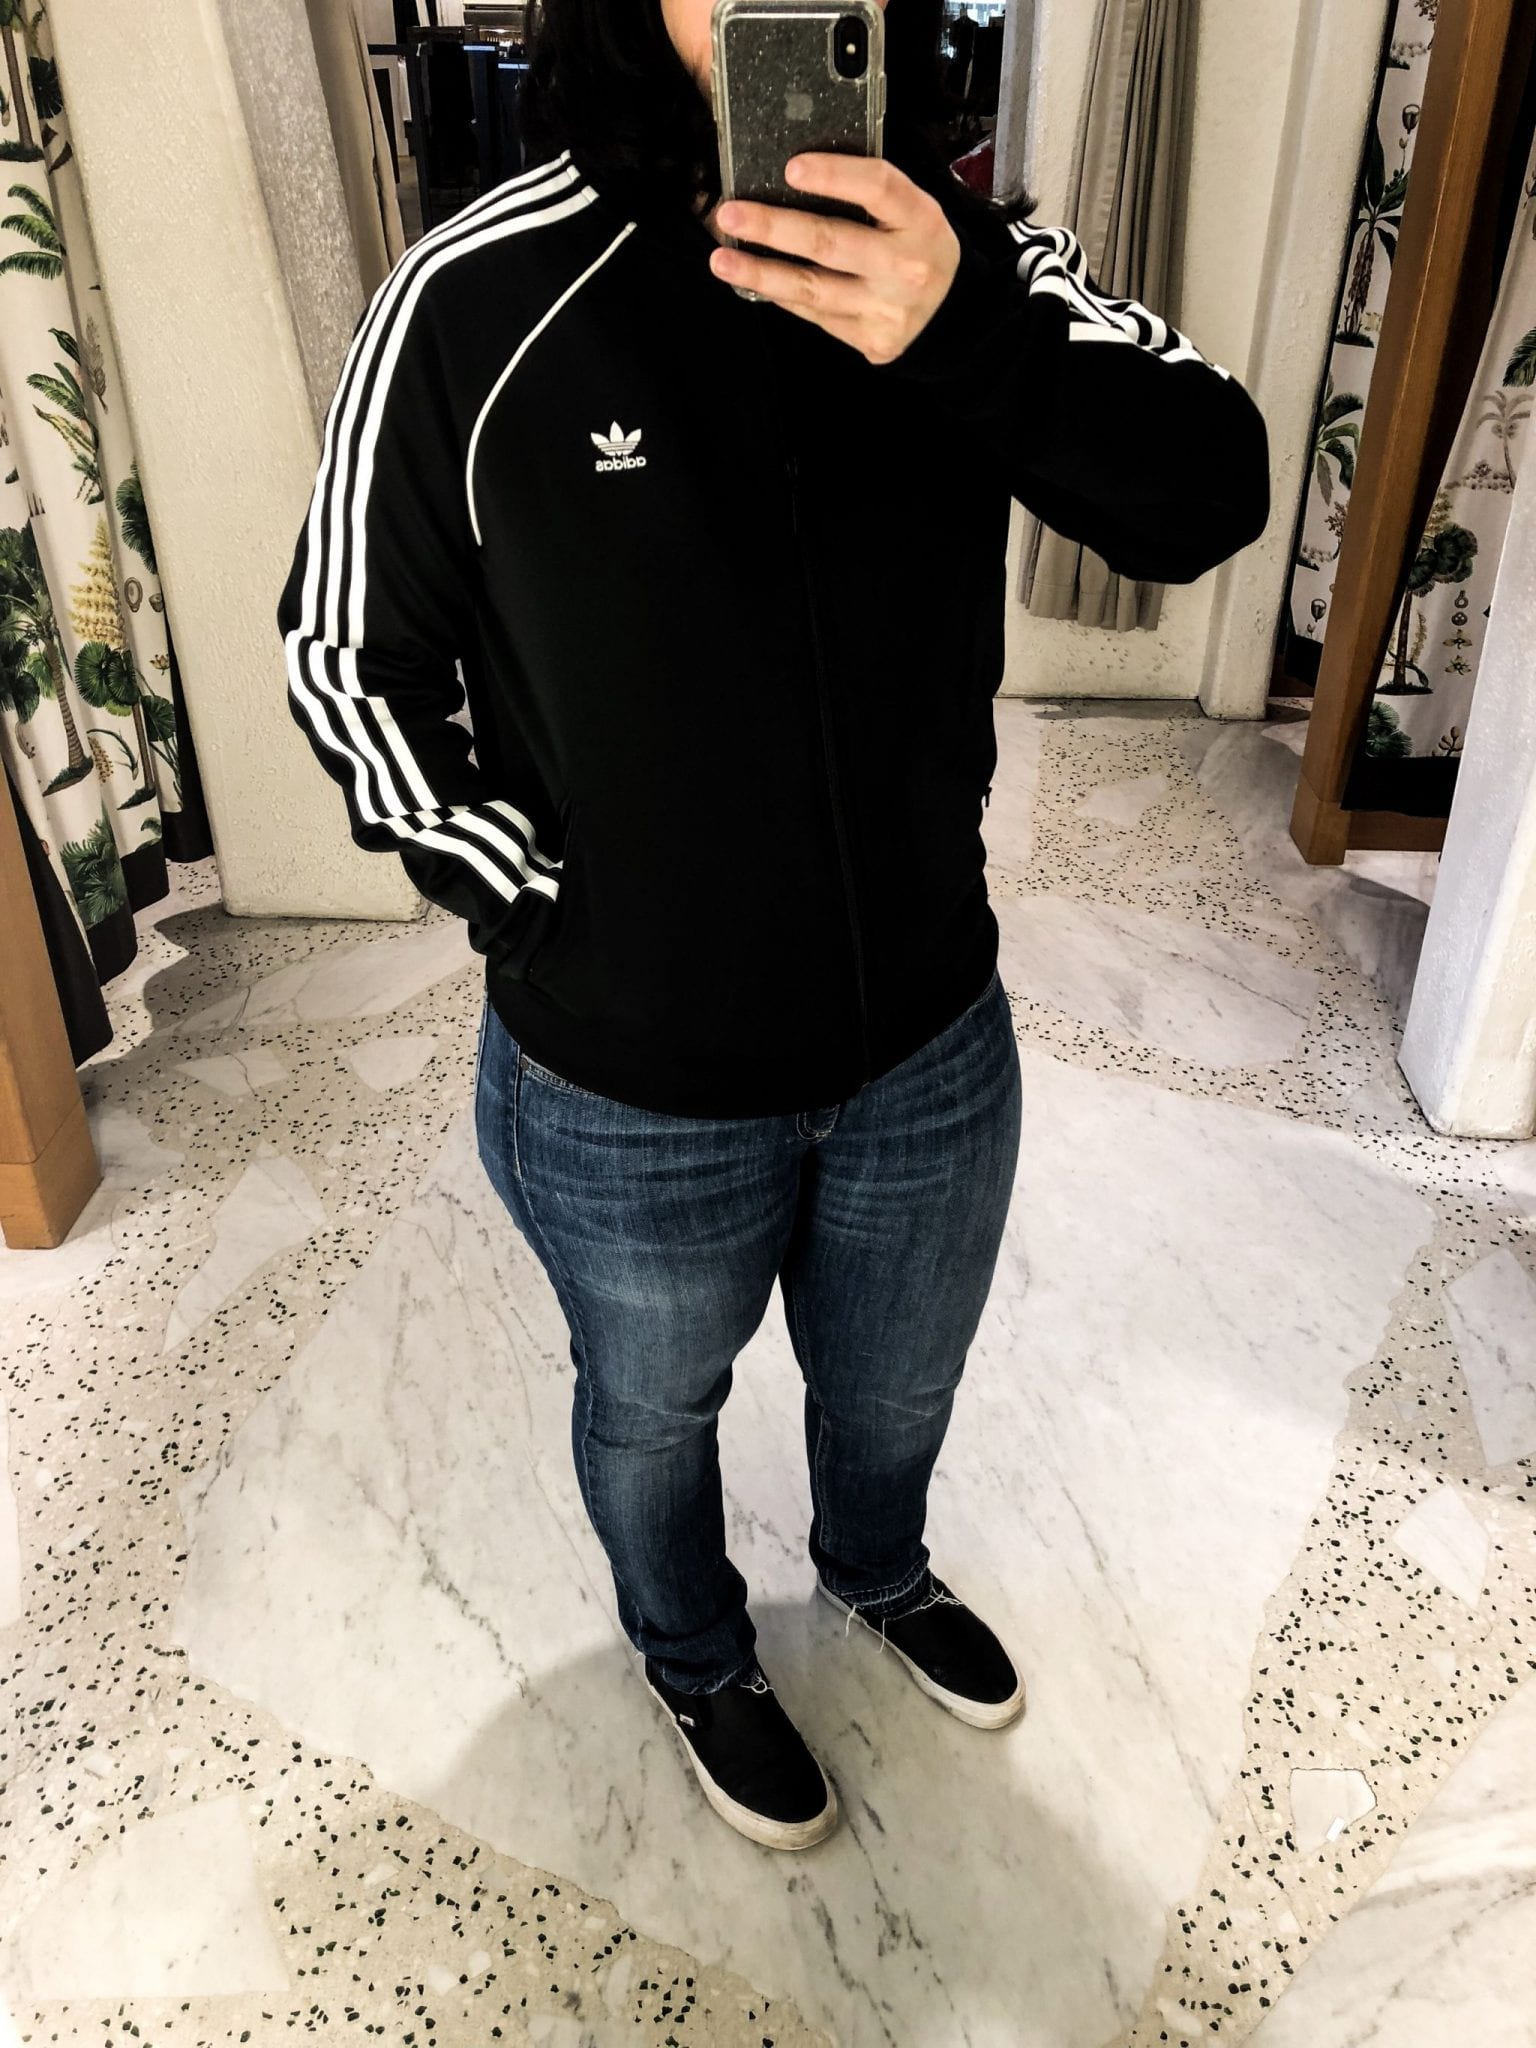 Fit Review: Adidas SST Track Jacket and Levi's Wedgie Fit Jeans